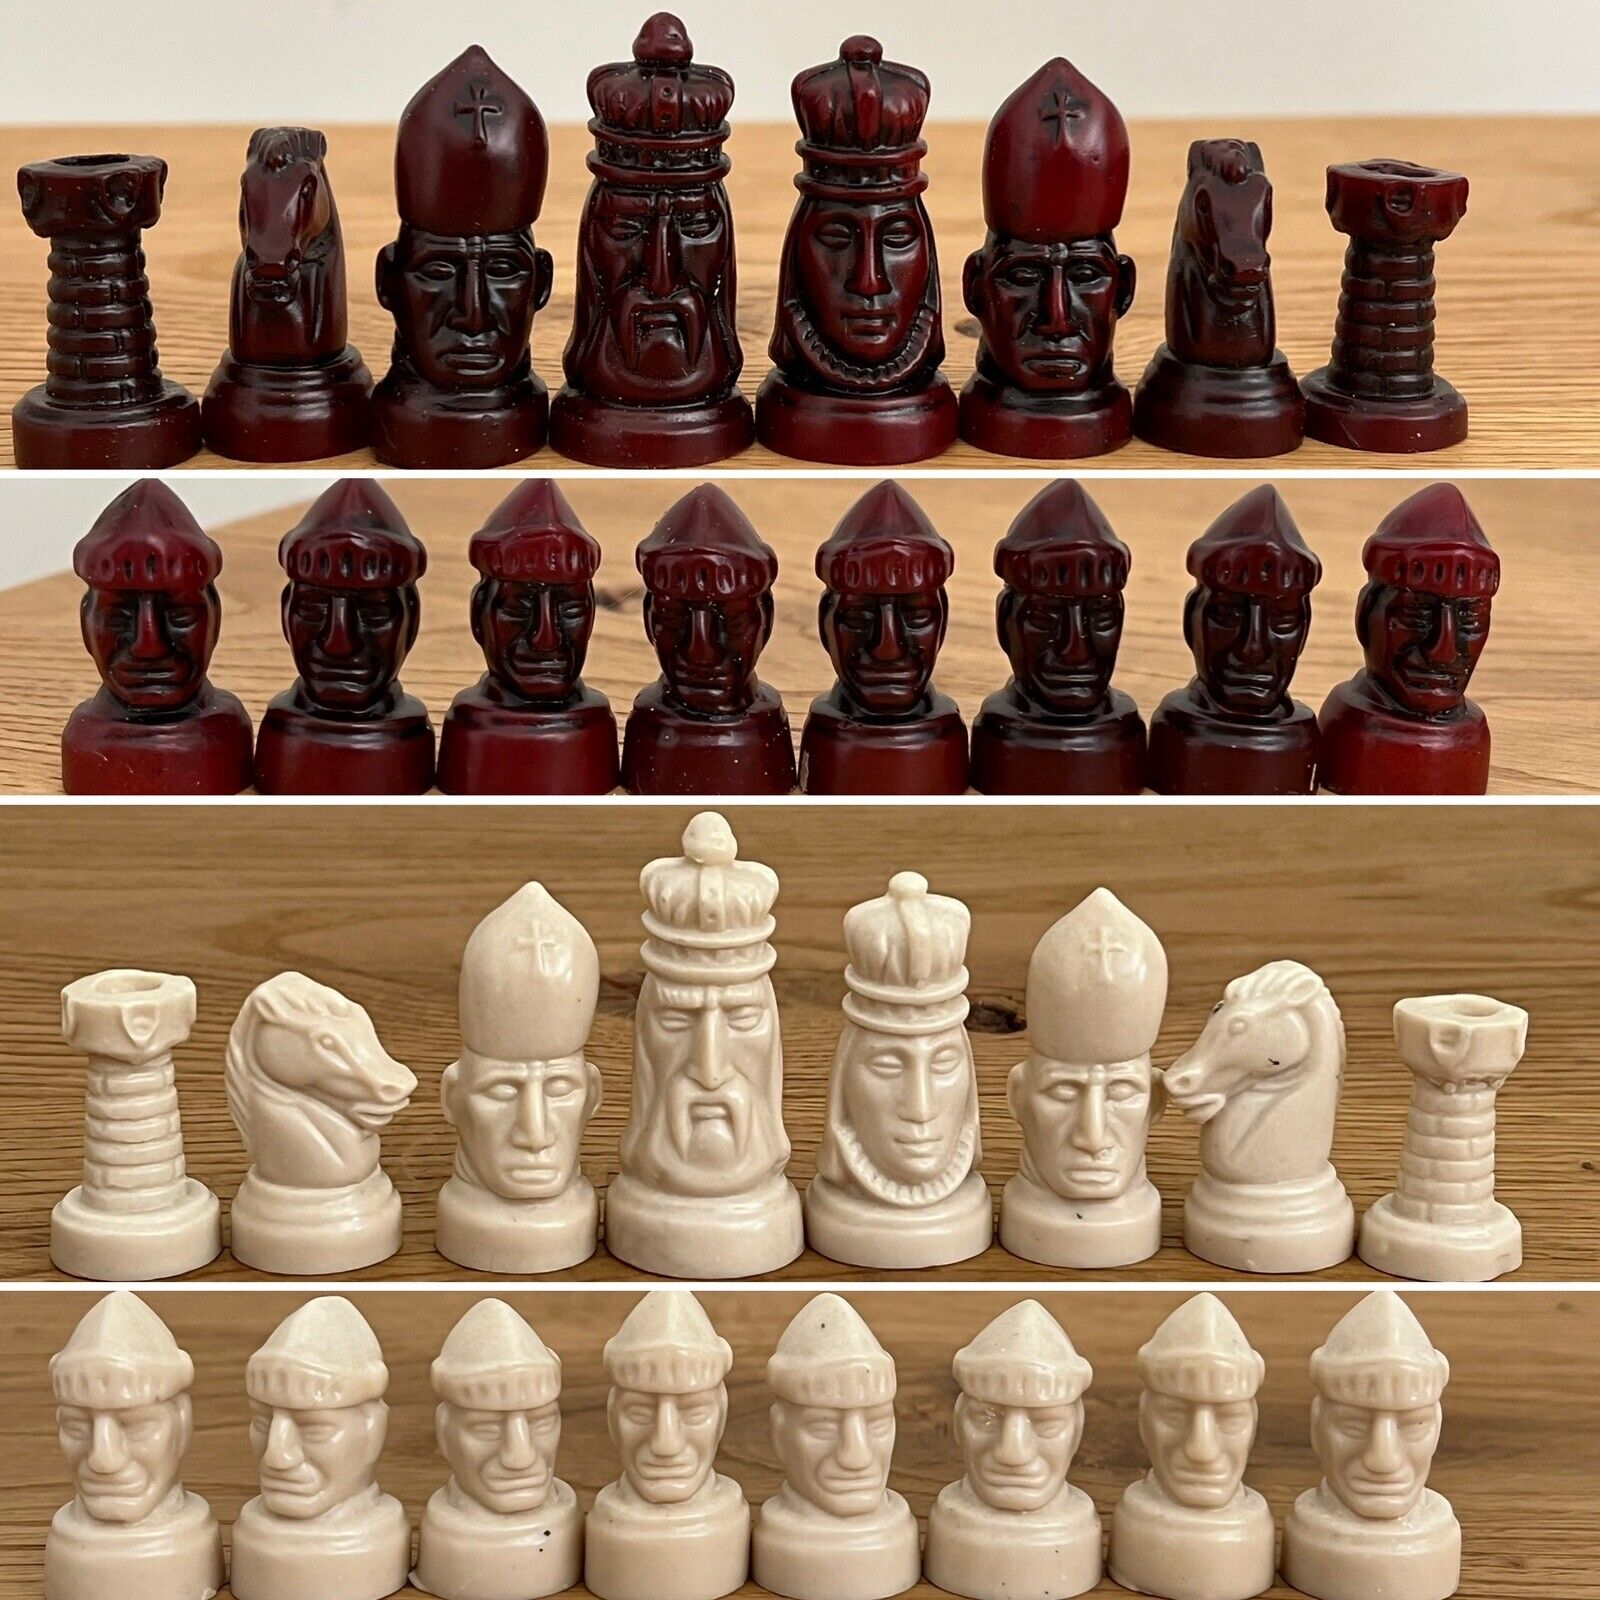 Vintage Resin Chess Game Pawns Face Figures 100% Complete Set Burgundy/beige Tan